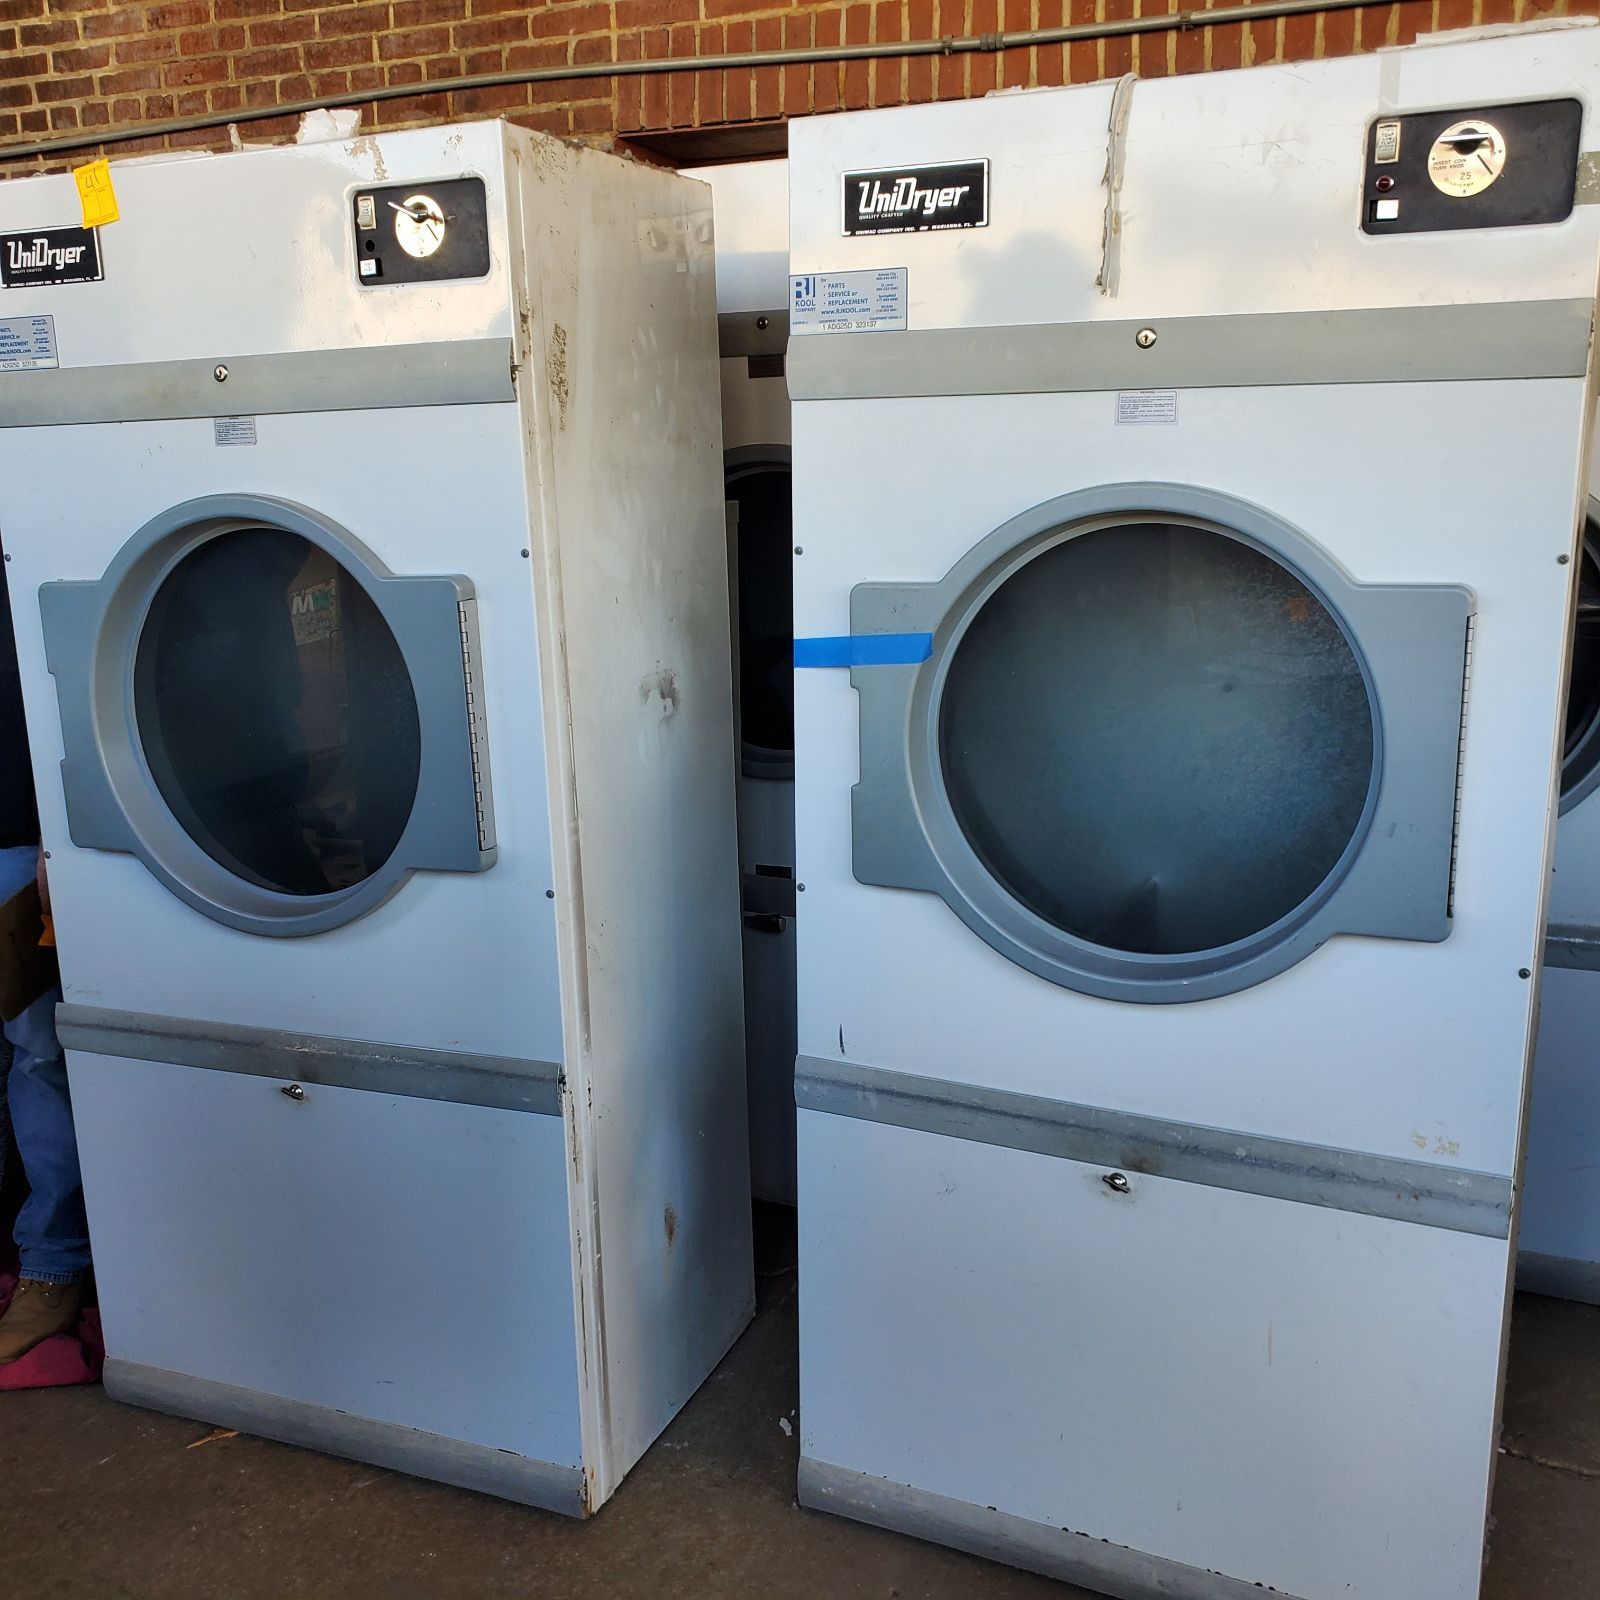 Unidryer Coin Operated Commercial Dryers